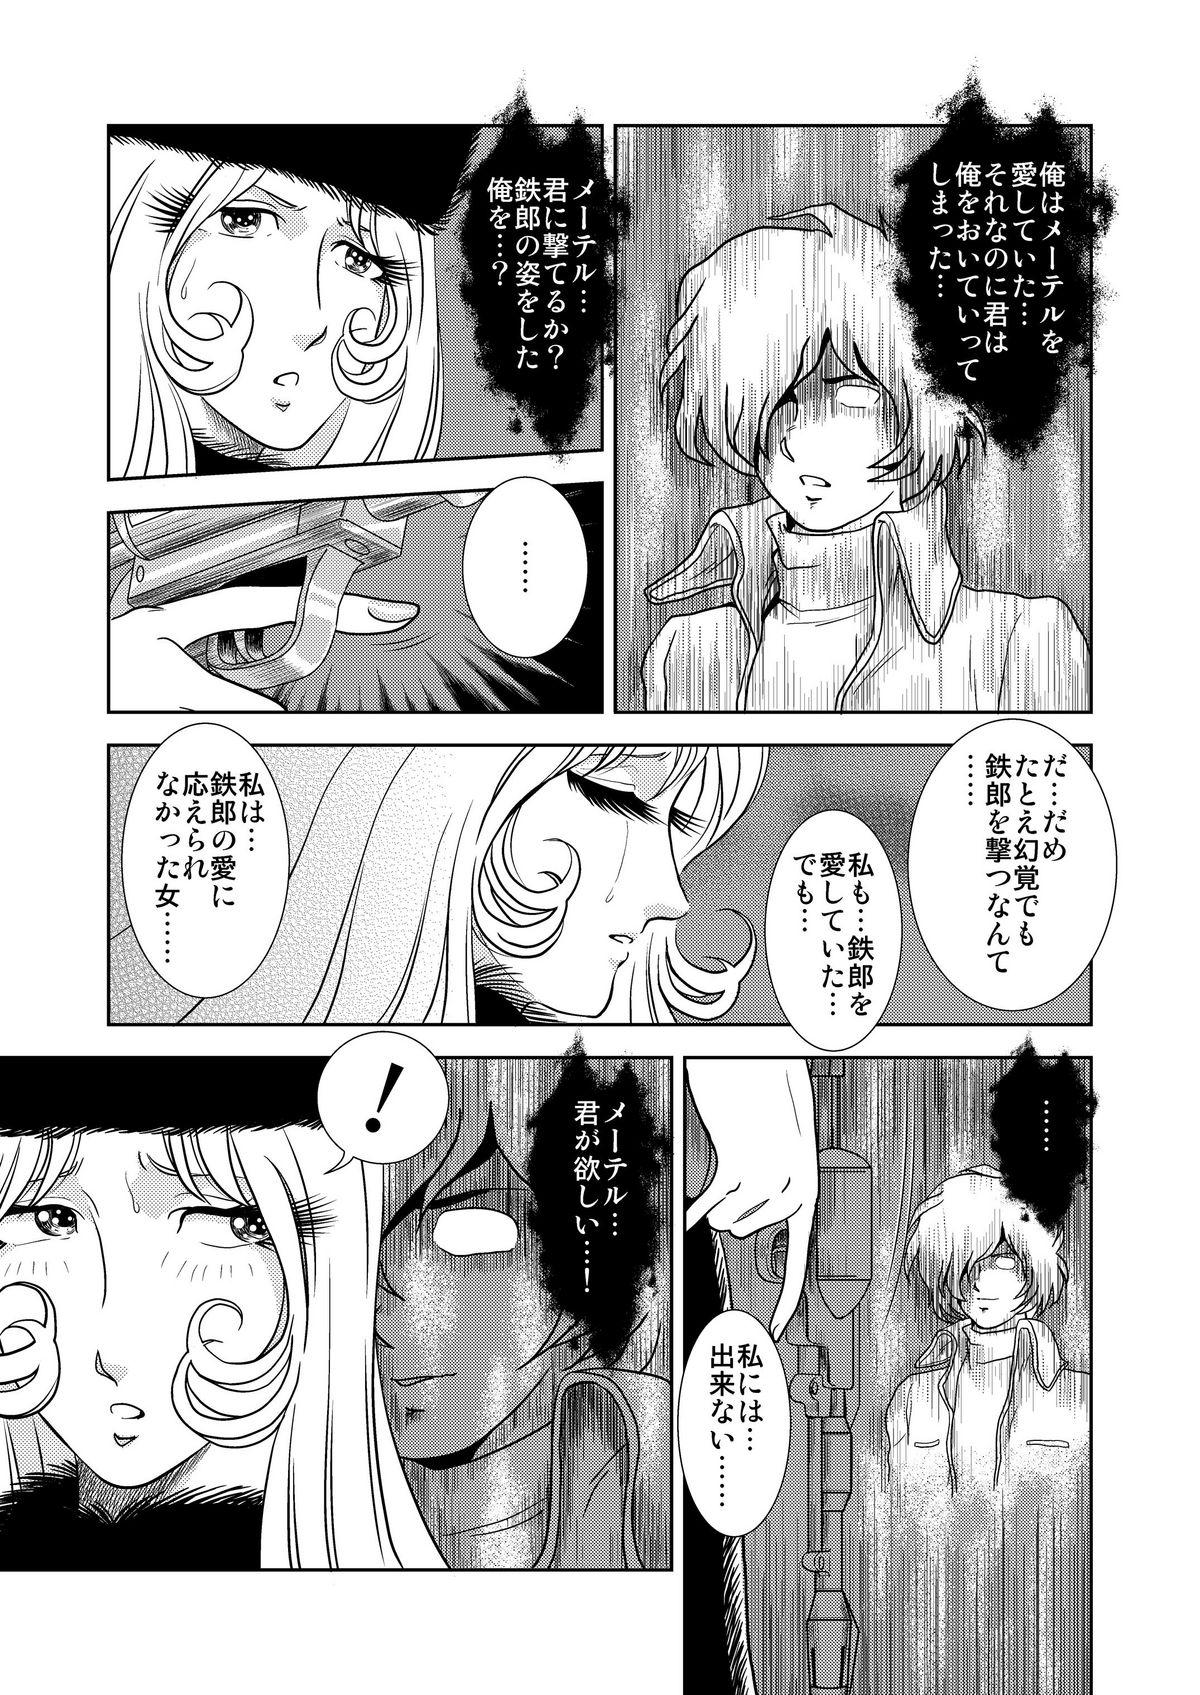 Tight Cunt Maetel Story - Galaxy express 999 Jap - Page 7